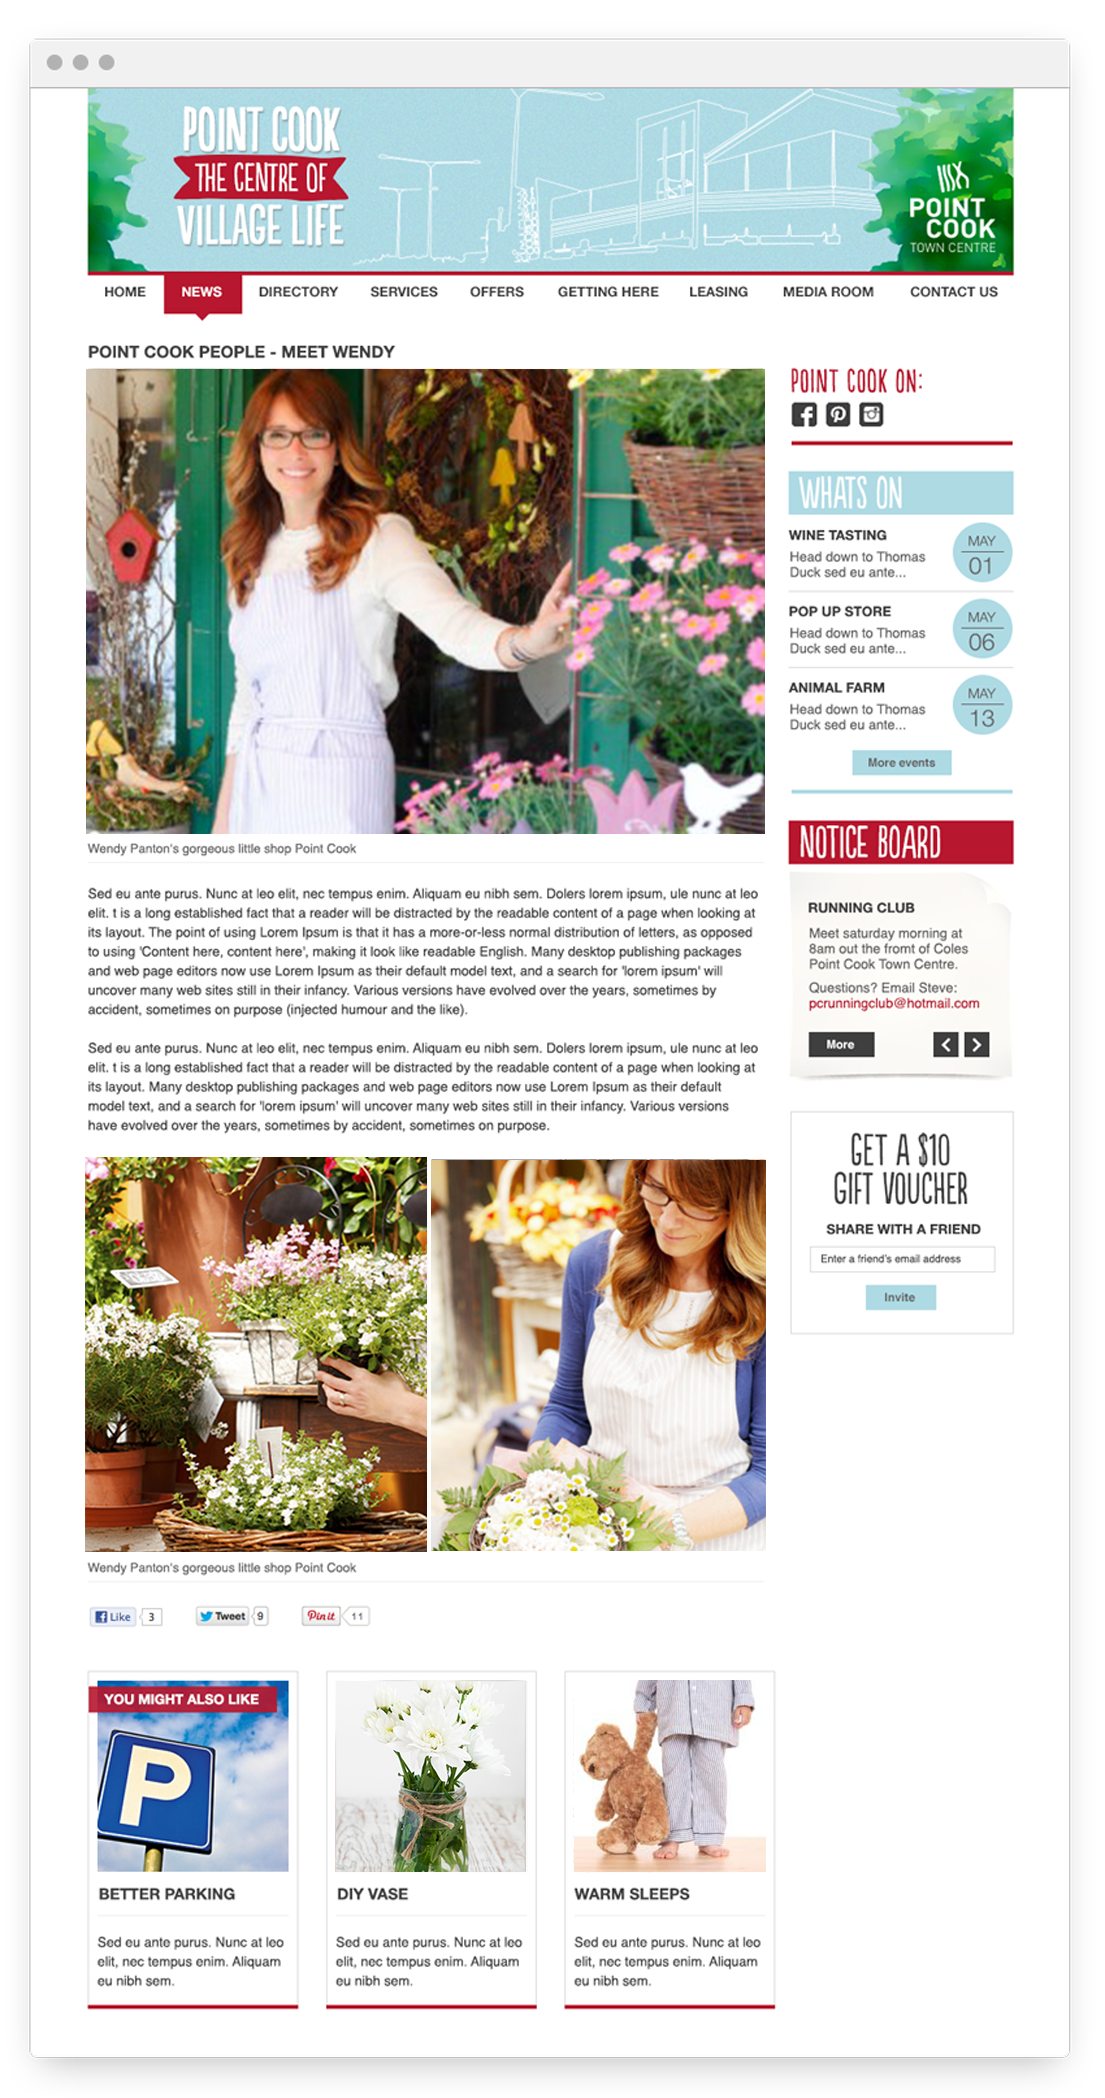 Point Cook article mockup - Design by Kristy